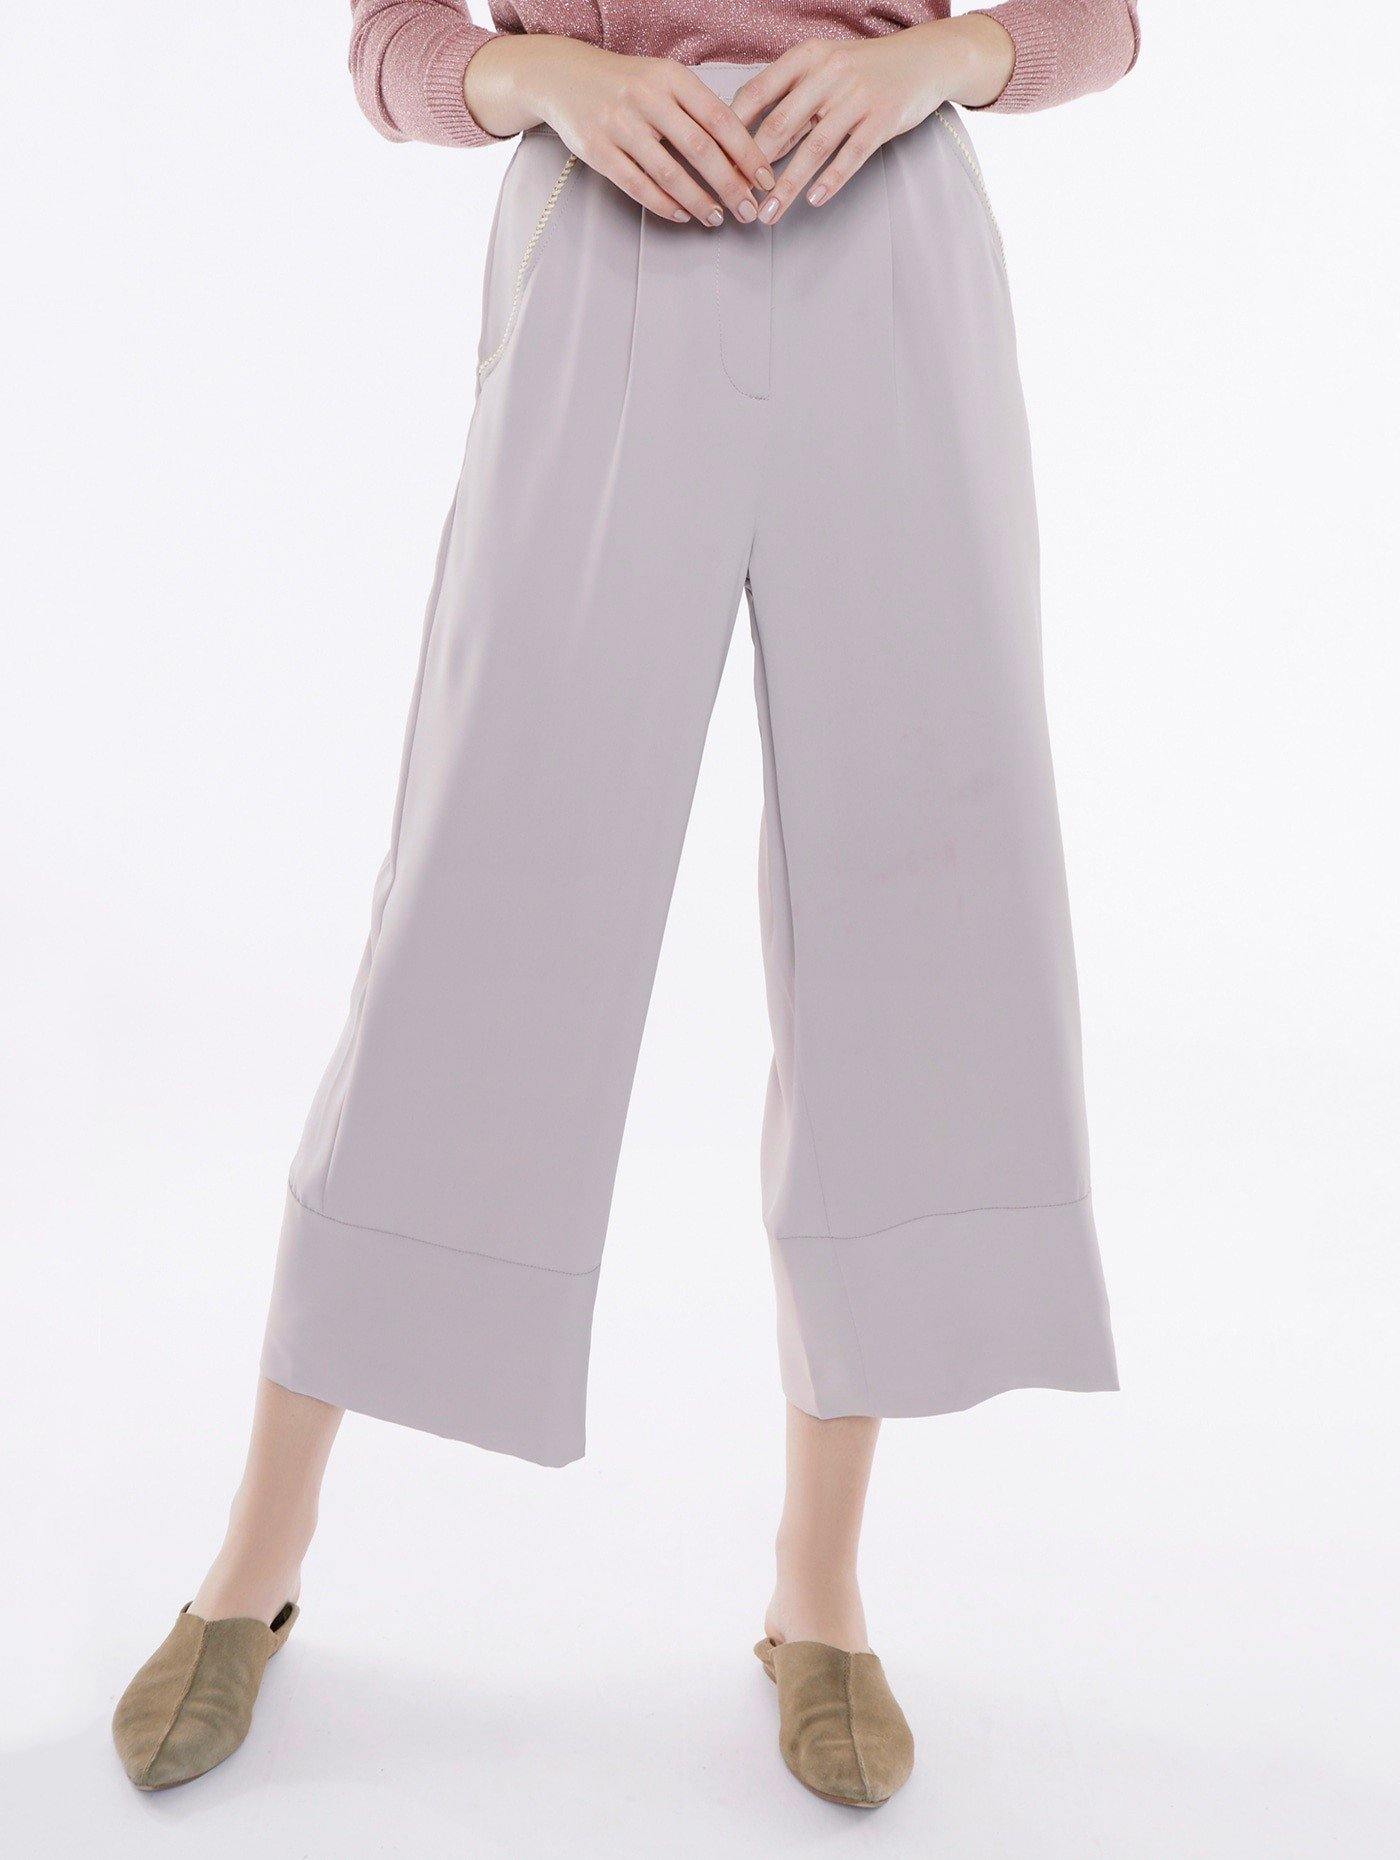 Culottes in pastell lila Meisie